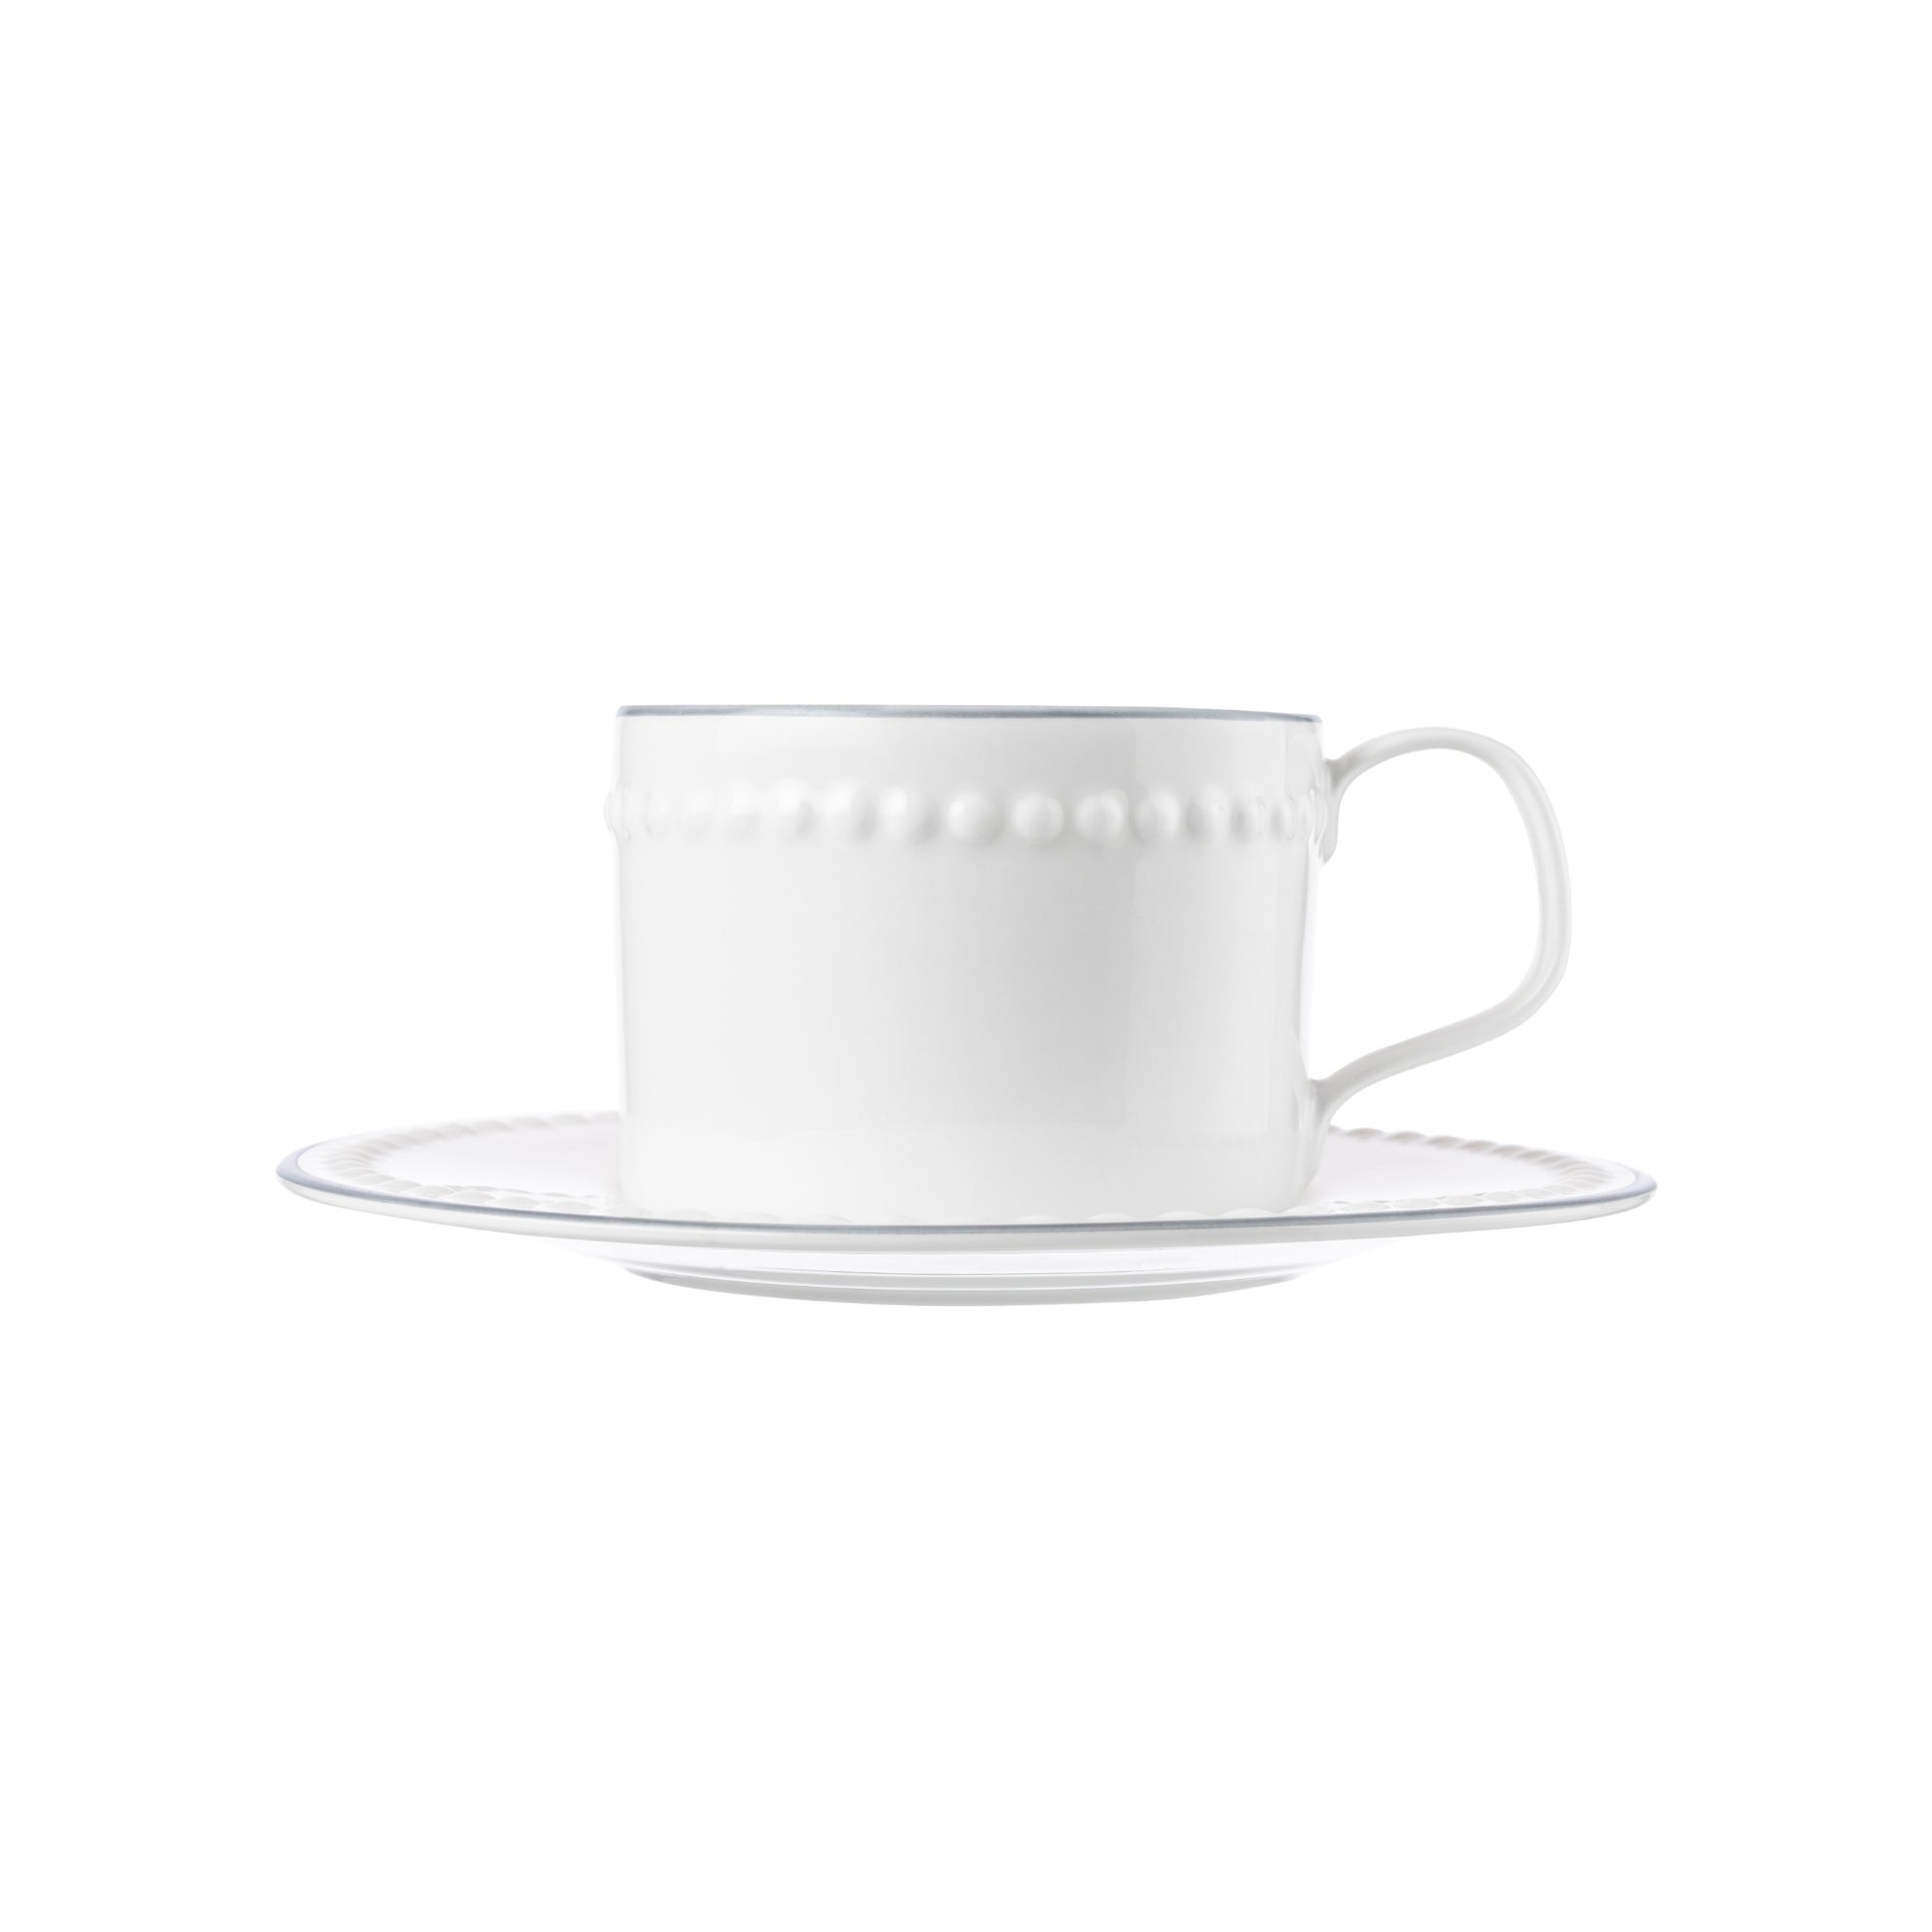 Mary Berry Signature Cup & Saucer | Dunelm